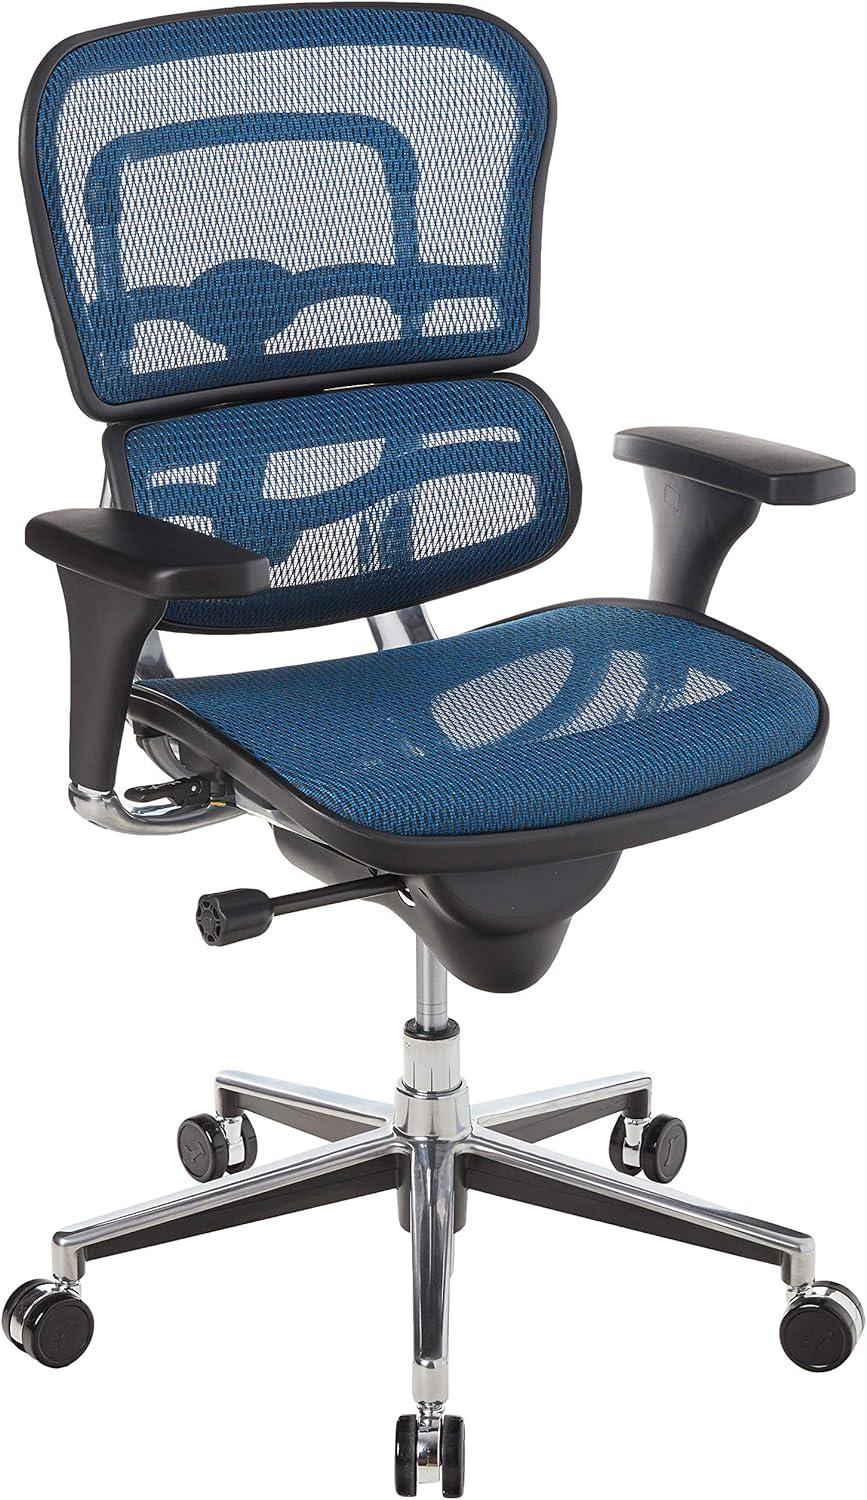 Ergohuman High Back Executive Swivel Chair with Adjustable Arms in Blue Mesh